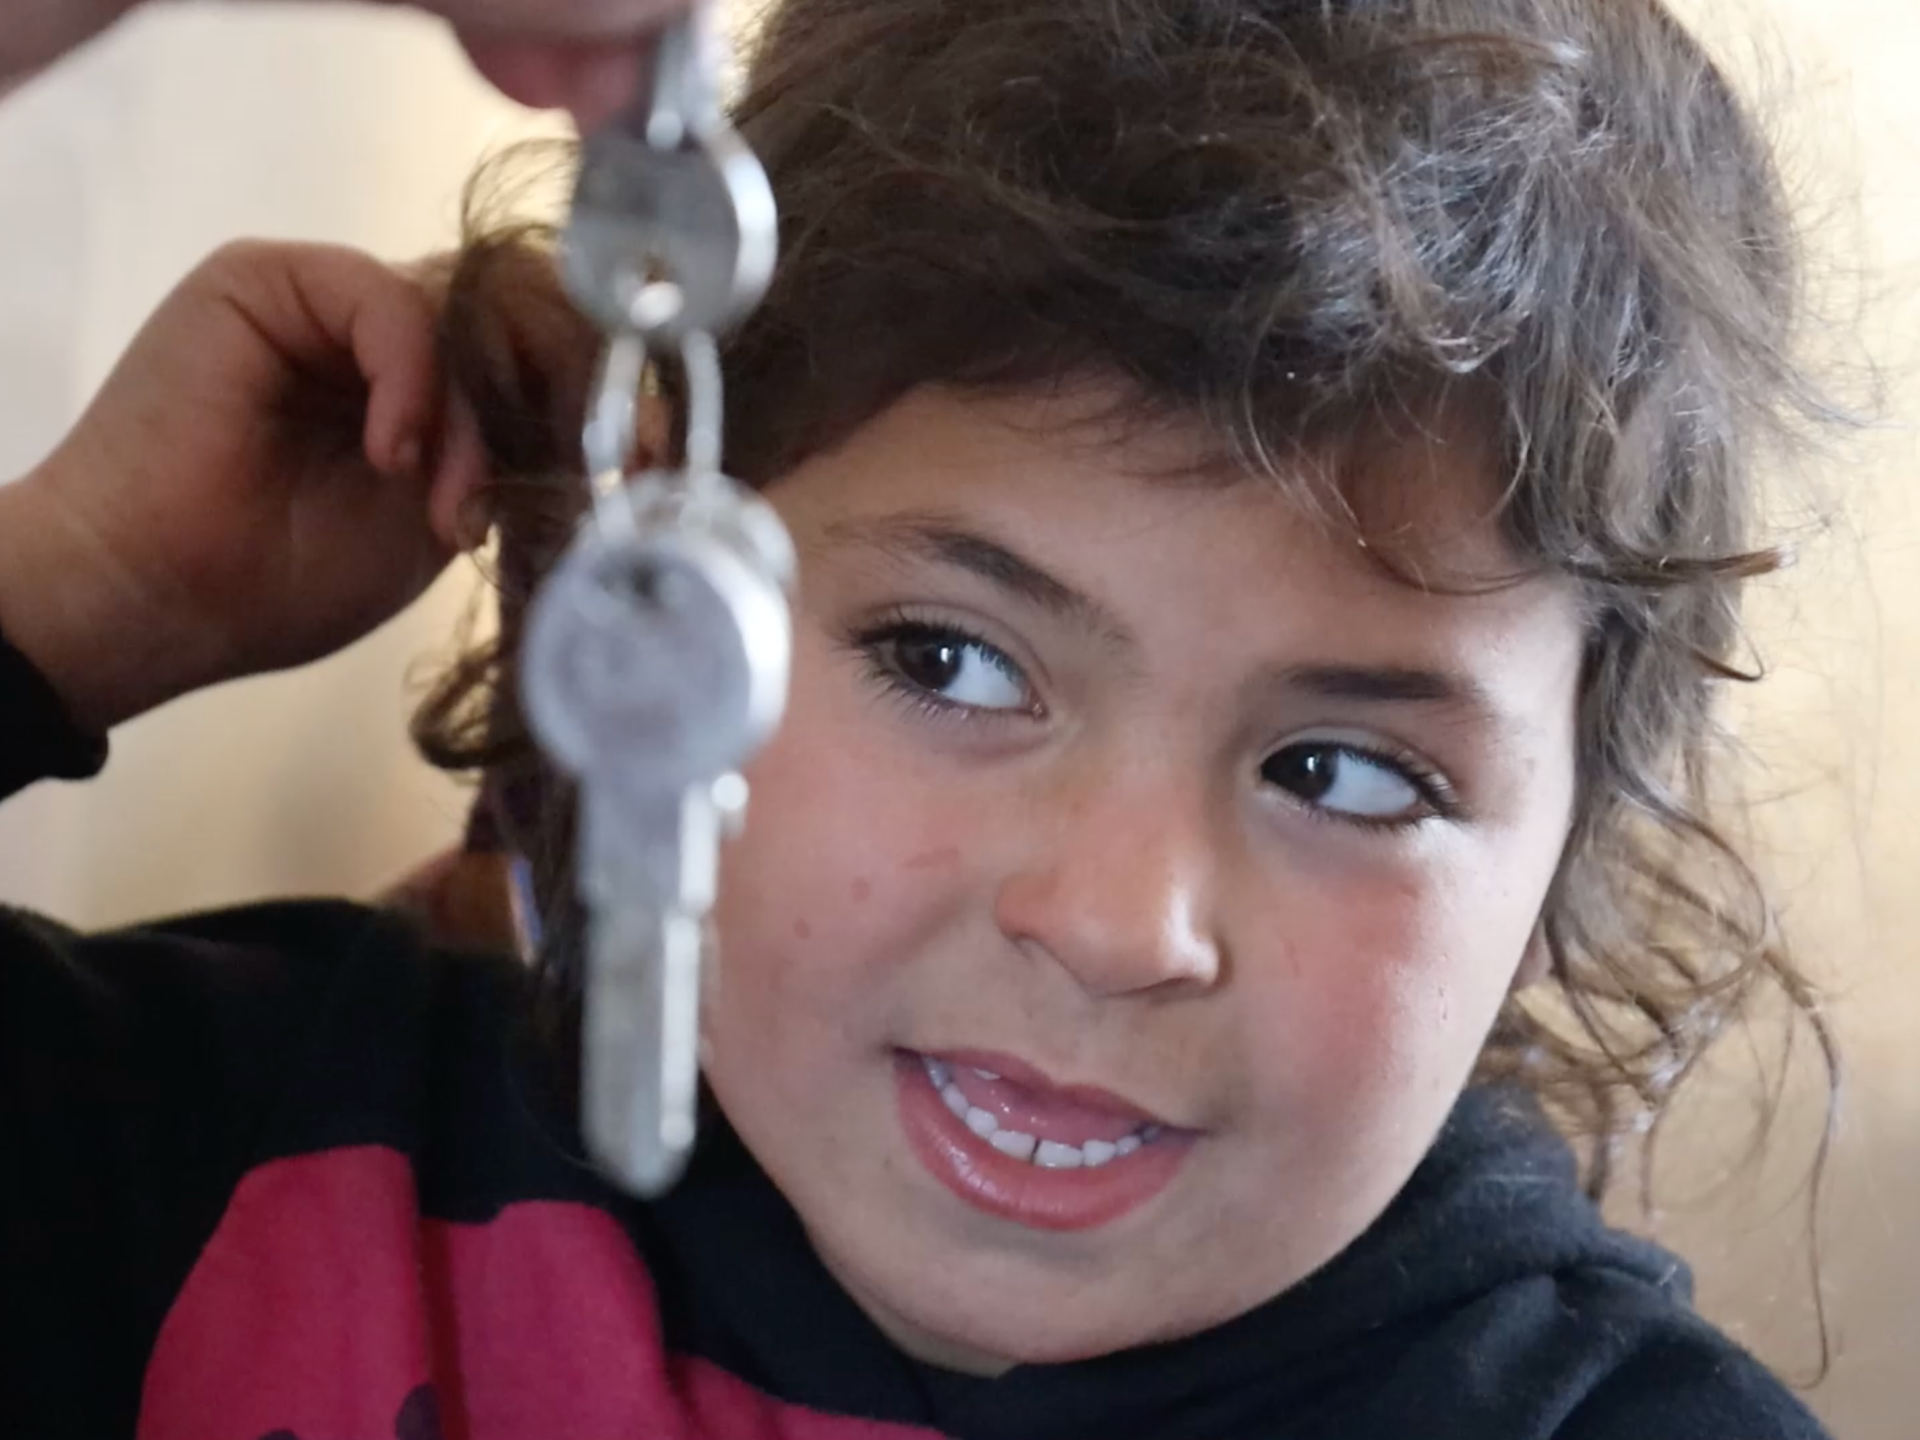 Displaced Syrians keep keys to their homes, like Palestinian refugees | Syria’s War [Video]